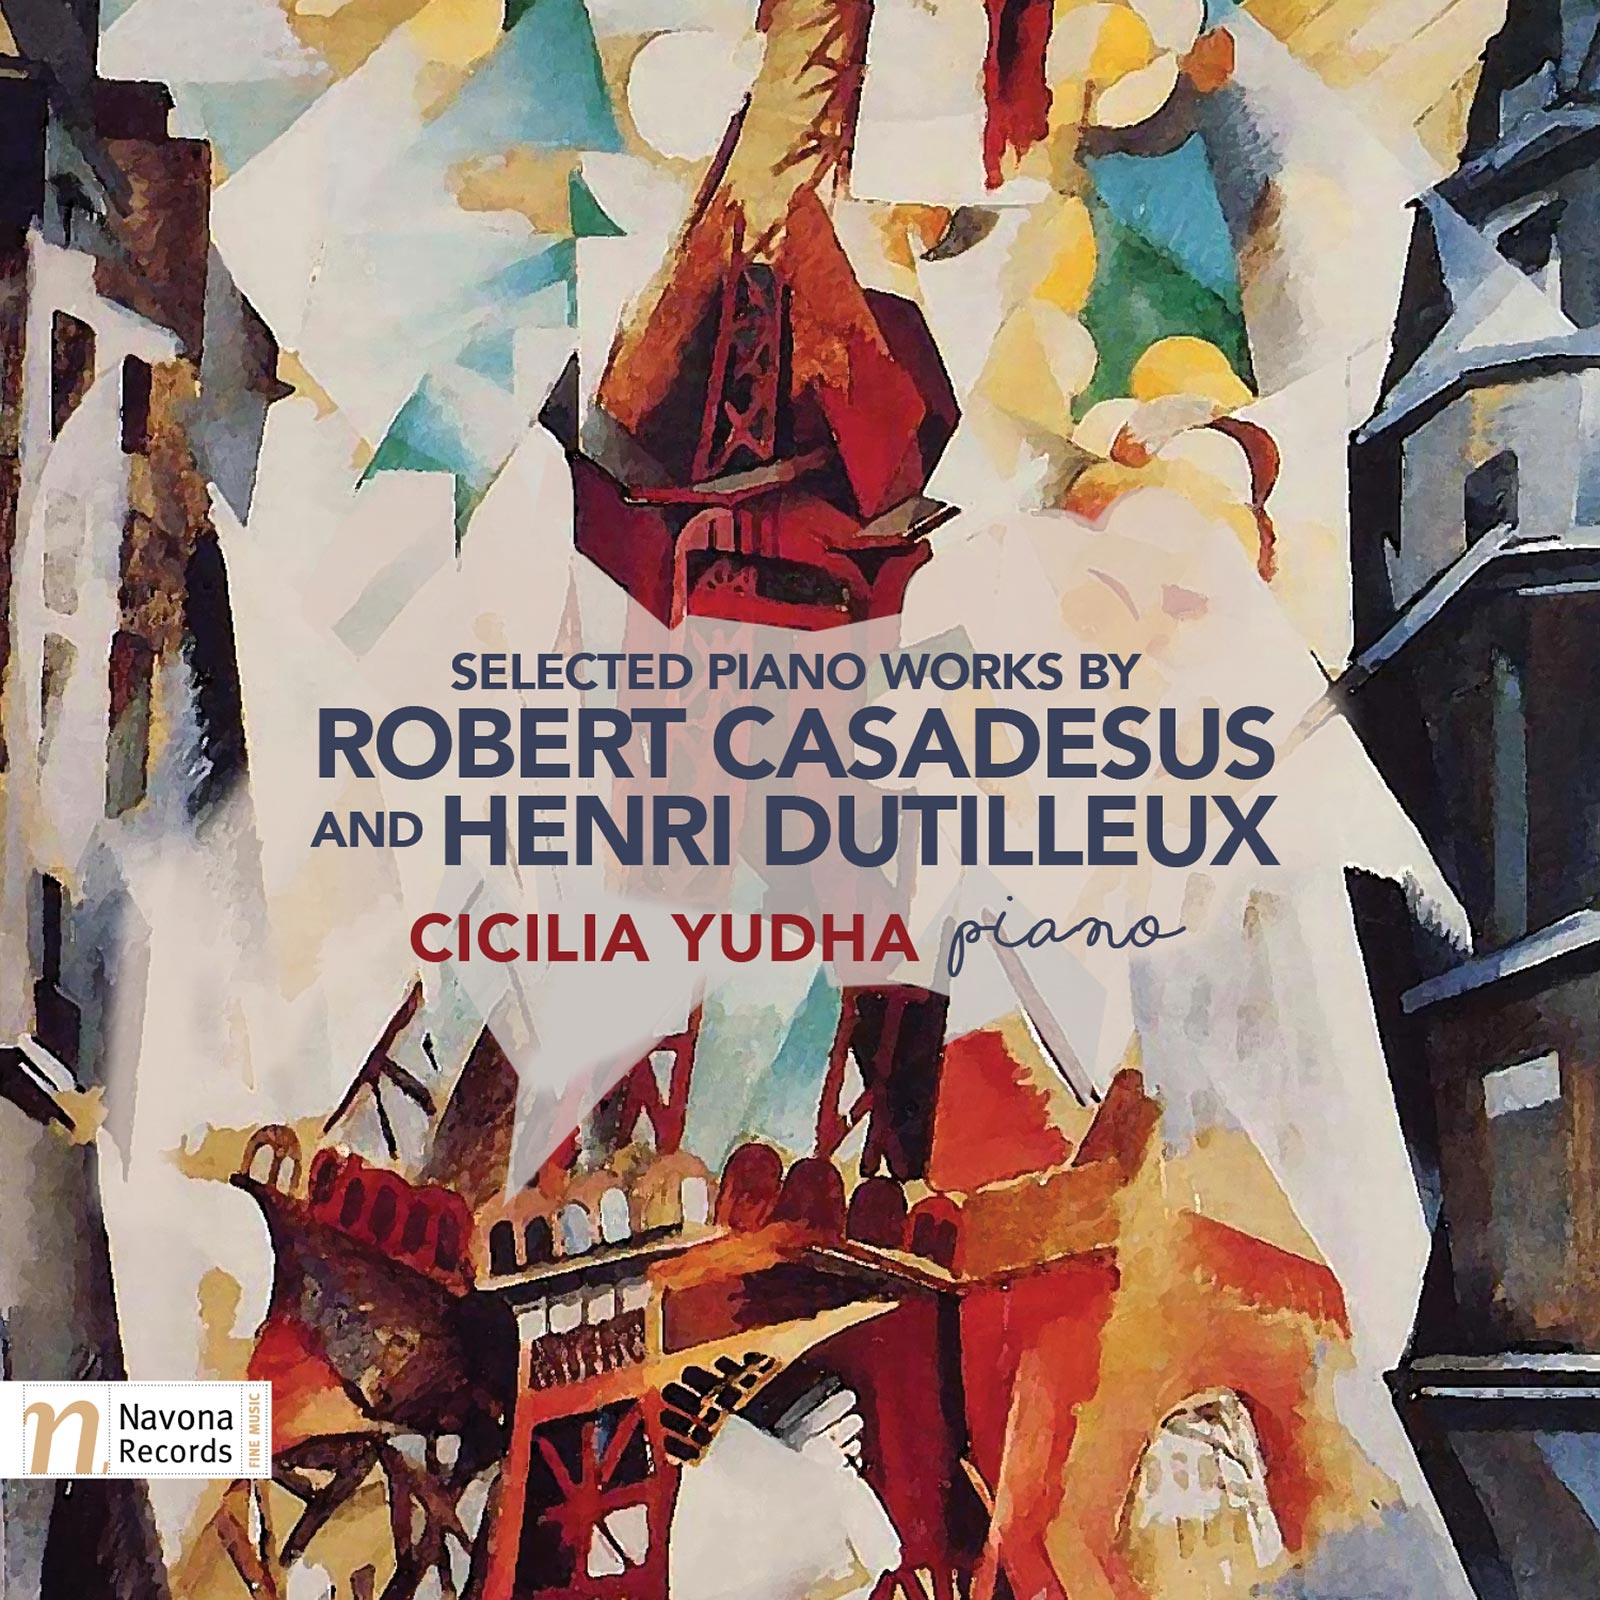 Selected Piano Works by Robert Casadesus and Henri Dutilleux